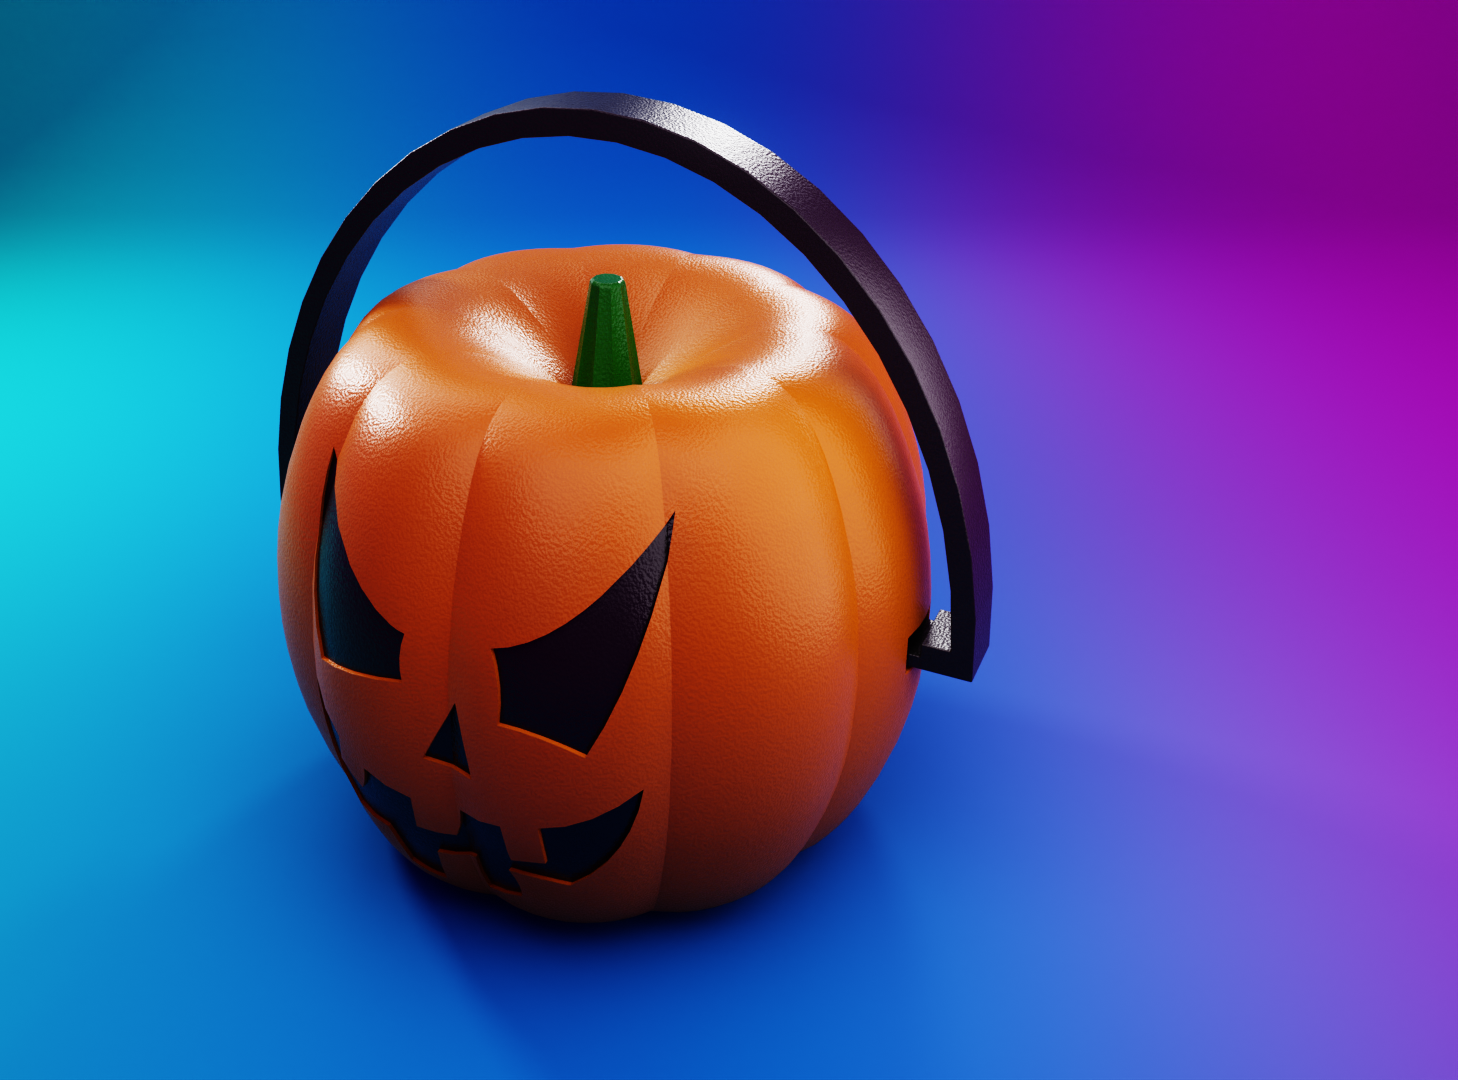 Sweets & Creativity! Craft Your Own 3D Modeled 'Trick-or-Treat' Magic